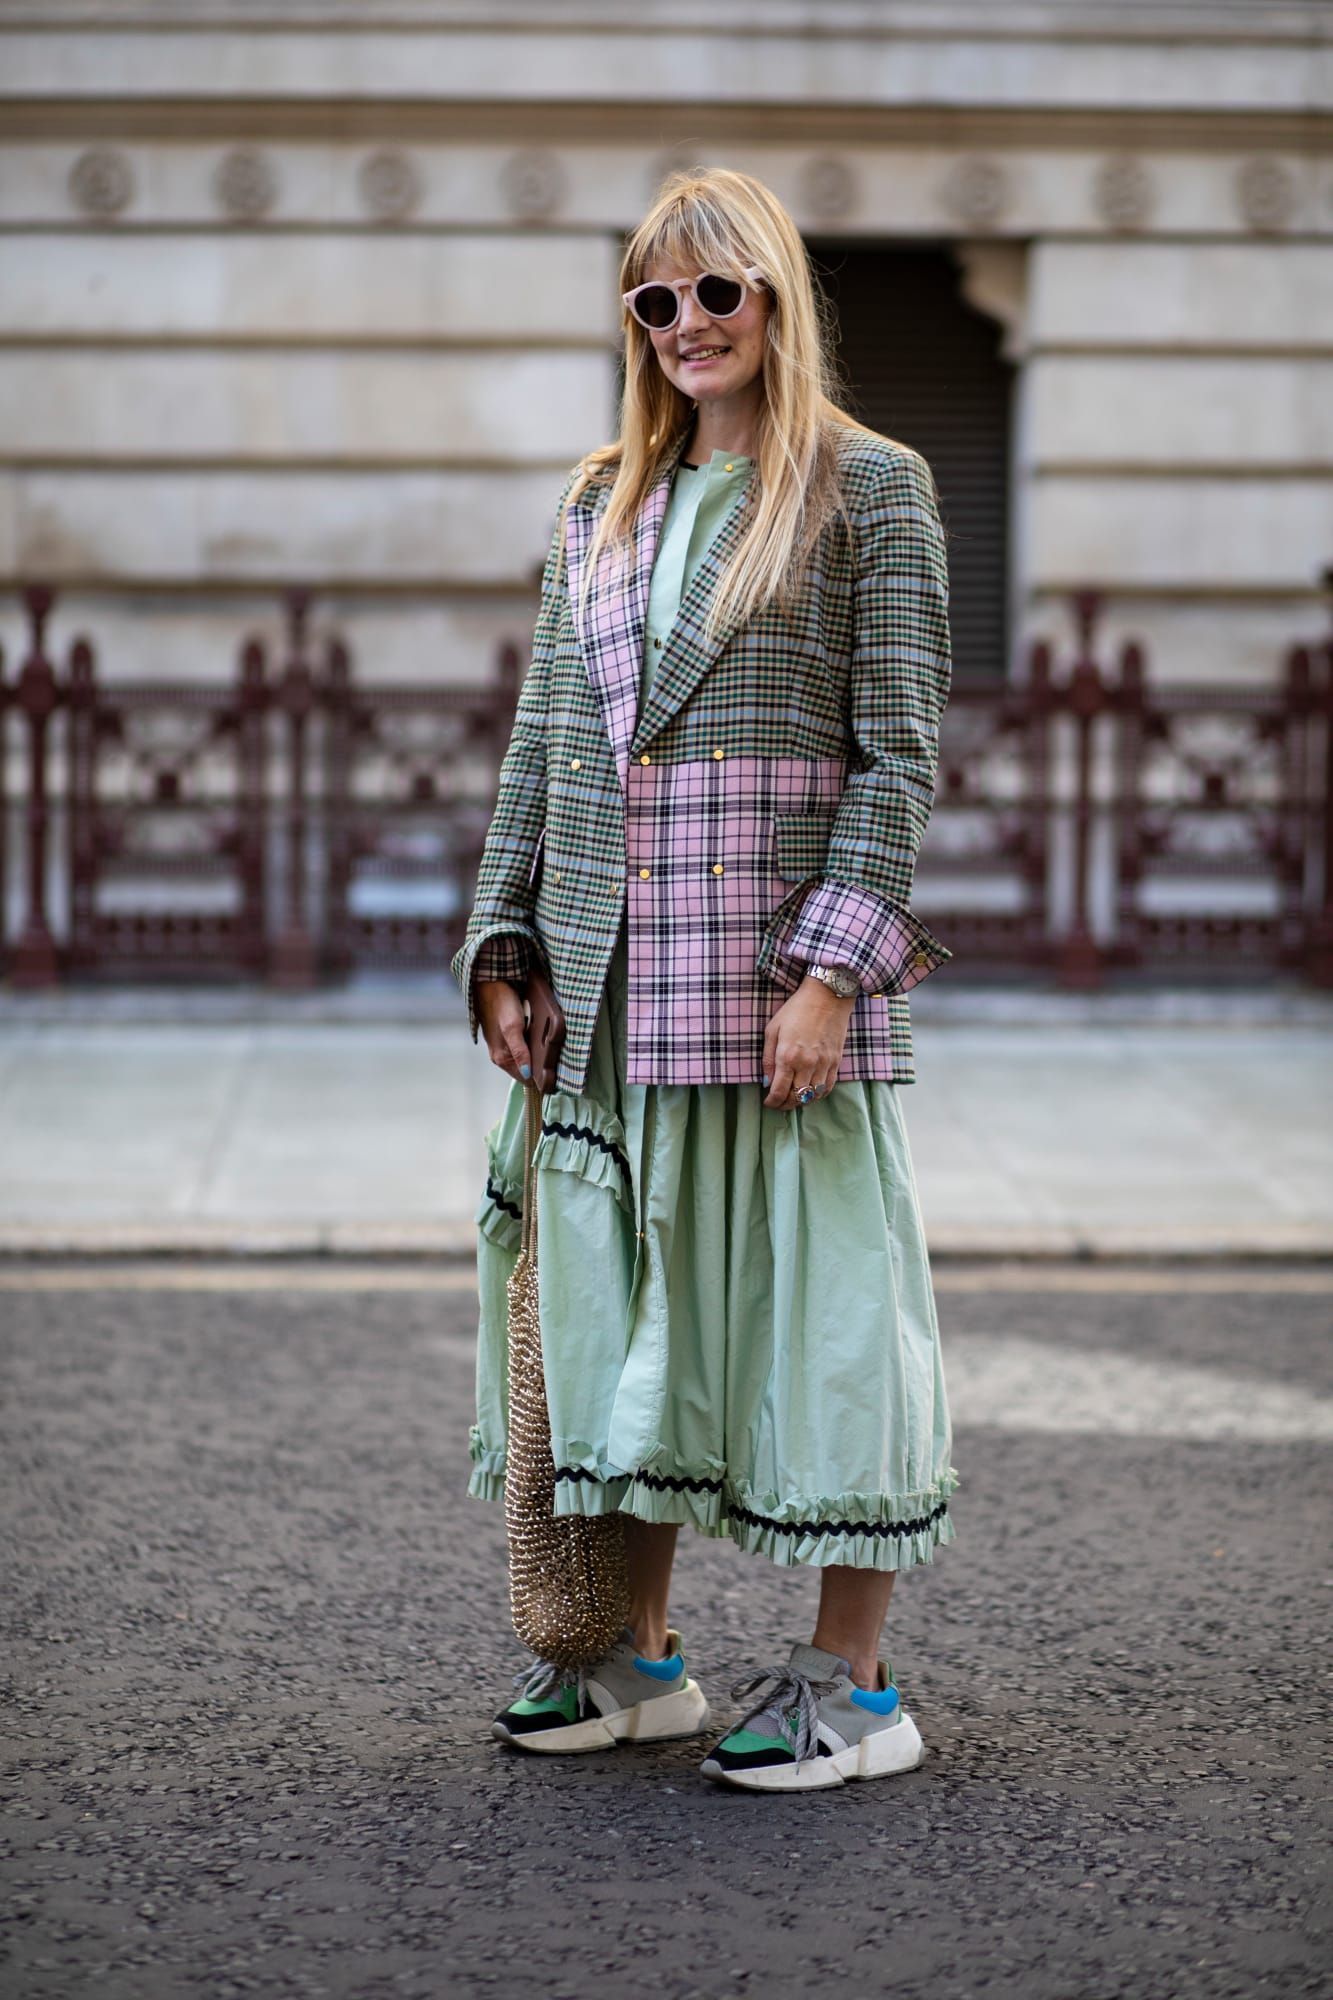 Showgoers Wore Sneakers With Their Dresses Over the Weekend at London Fashion Week - Showgoers Wore Sneakers With Their Dresses Over the Weekend at London Fashion Week -   17 london style 2019 ideas